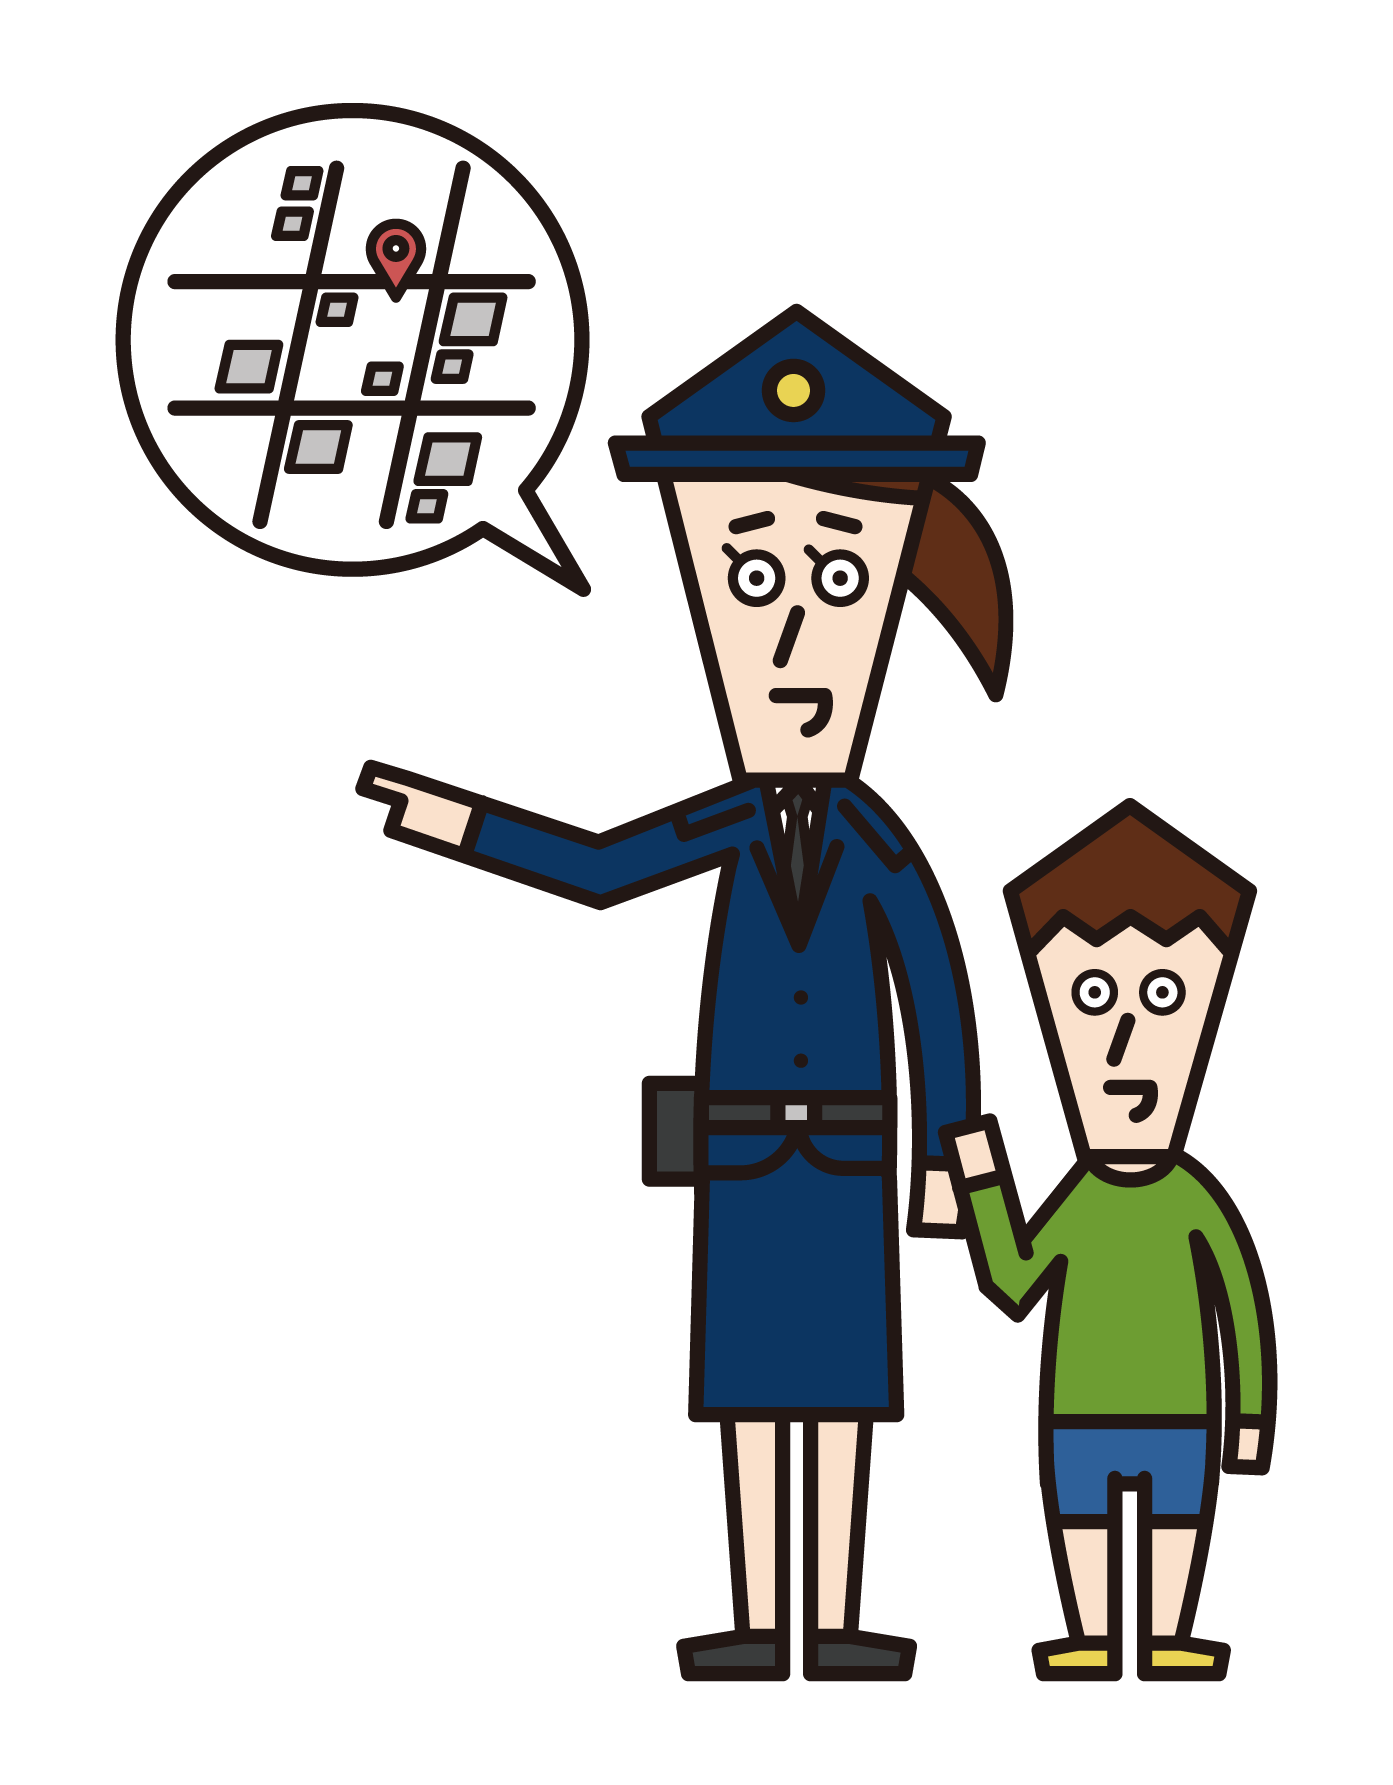 Illustration of a child (a boy) asking a police officer for directions